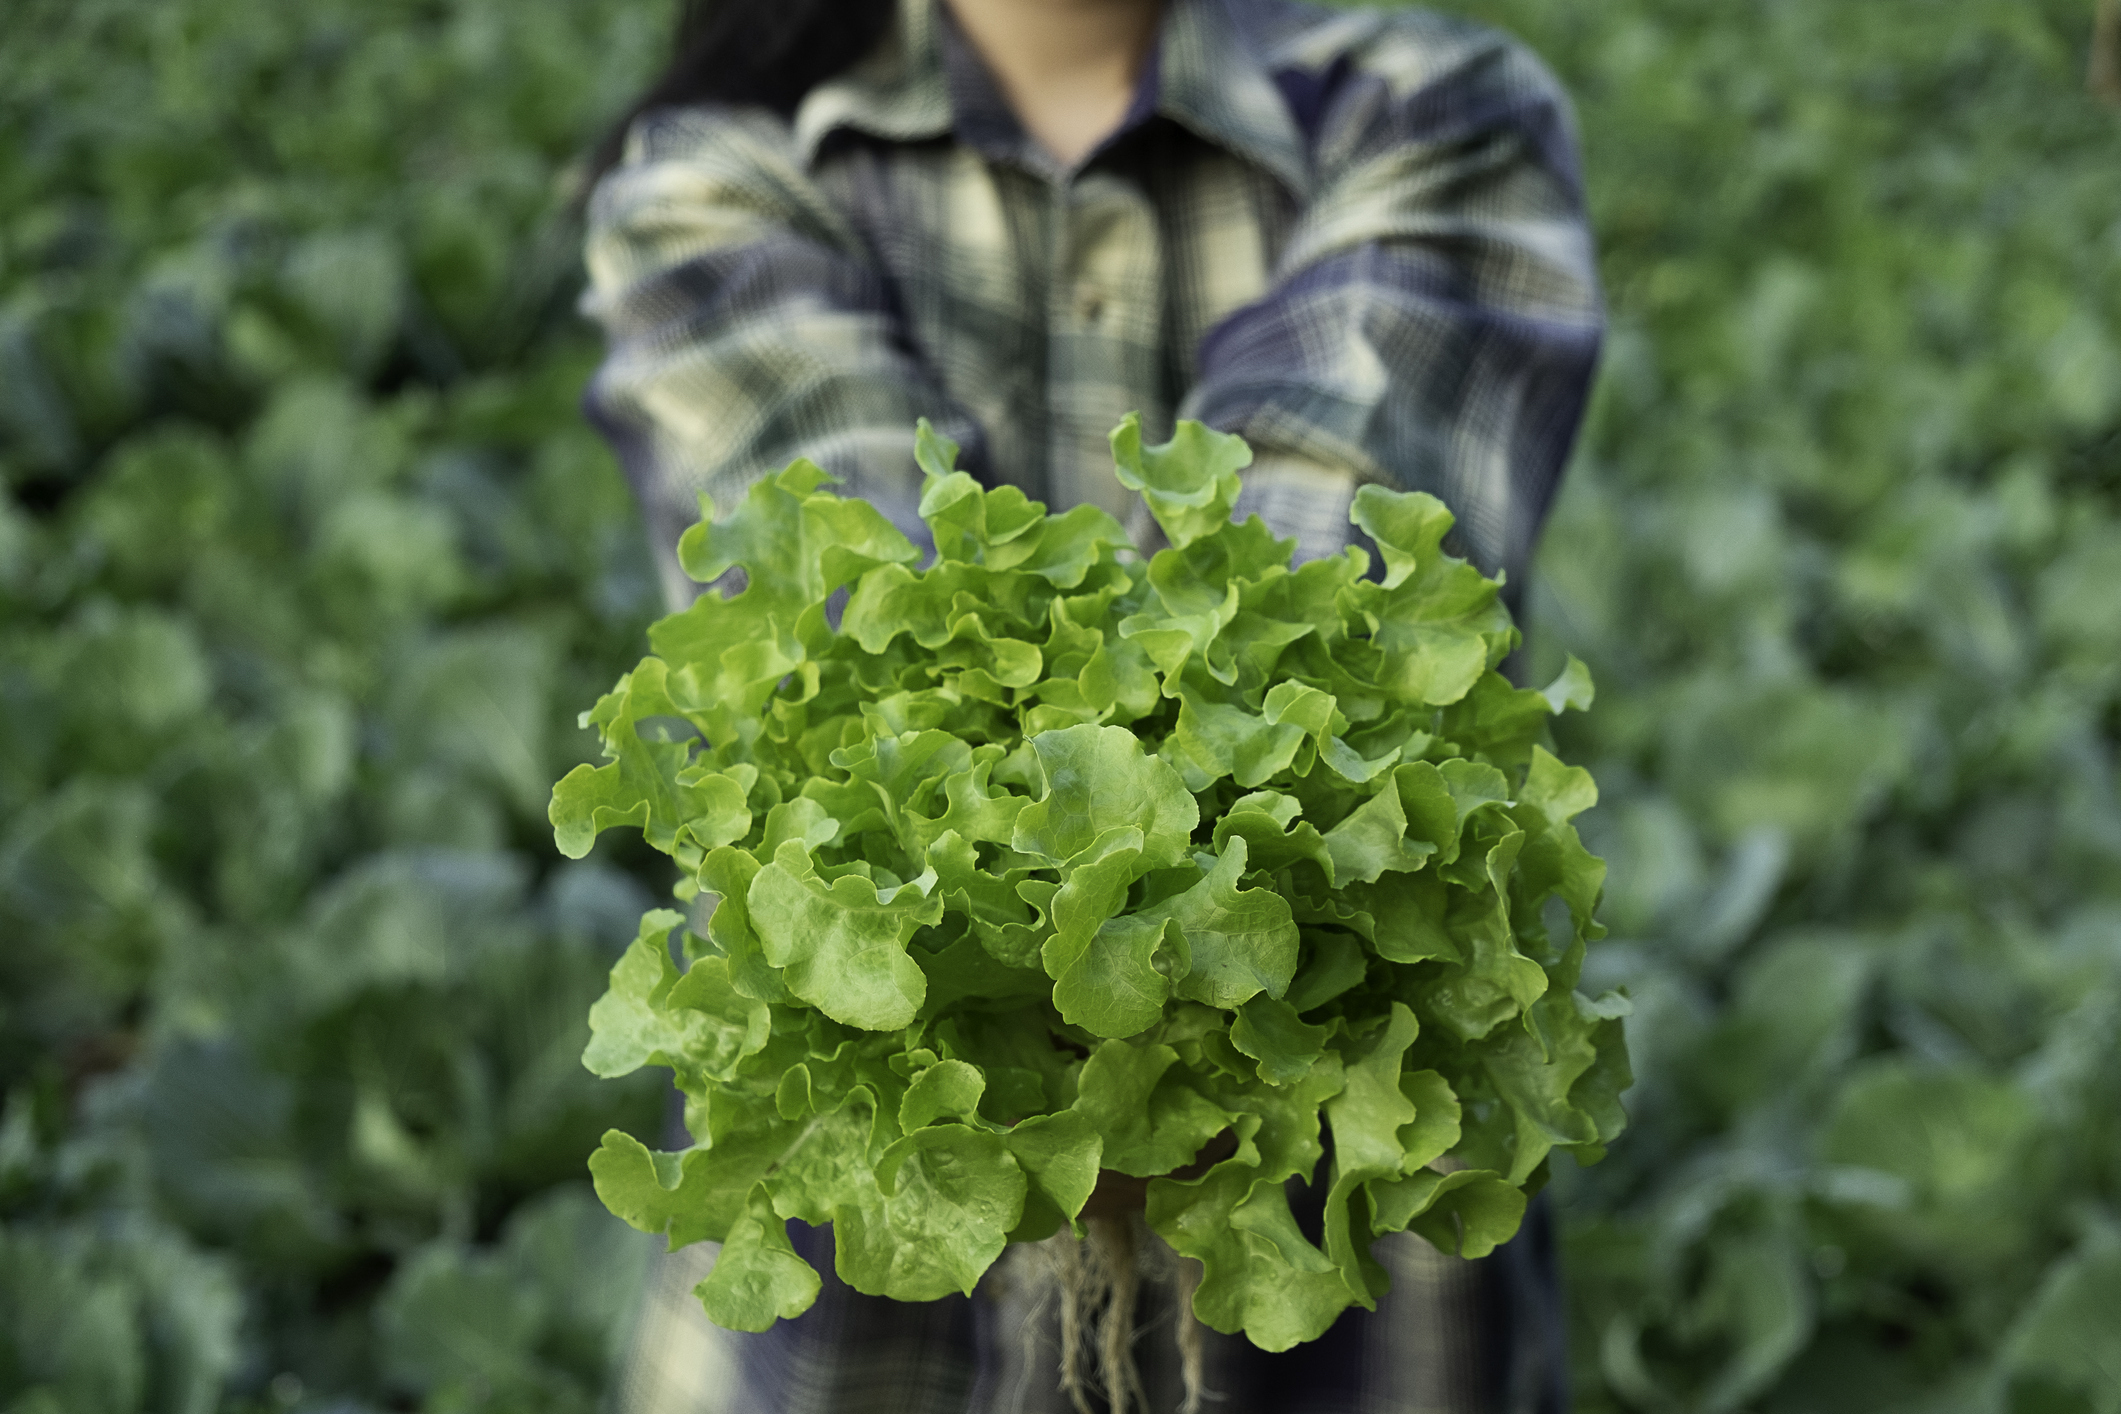 A person holds a bunch of leafy greens